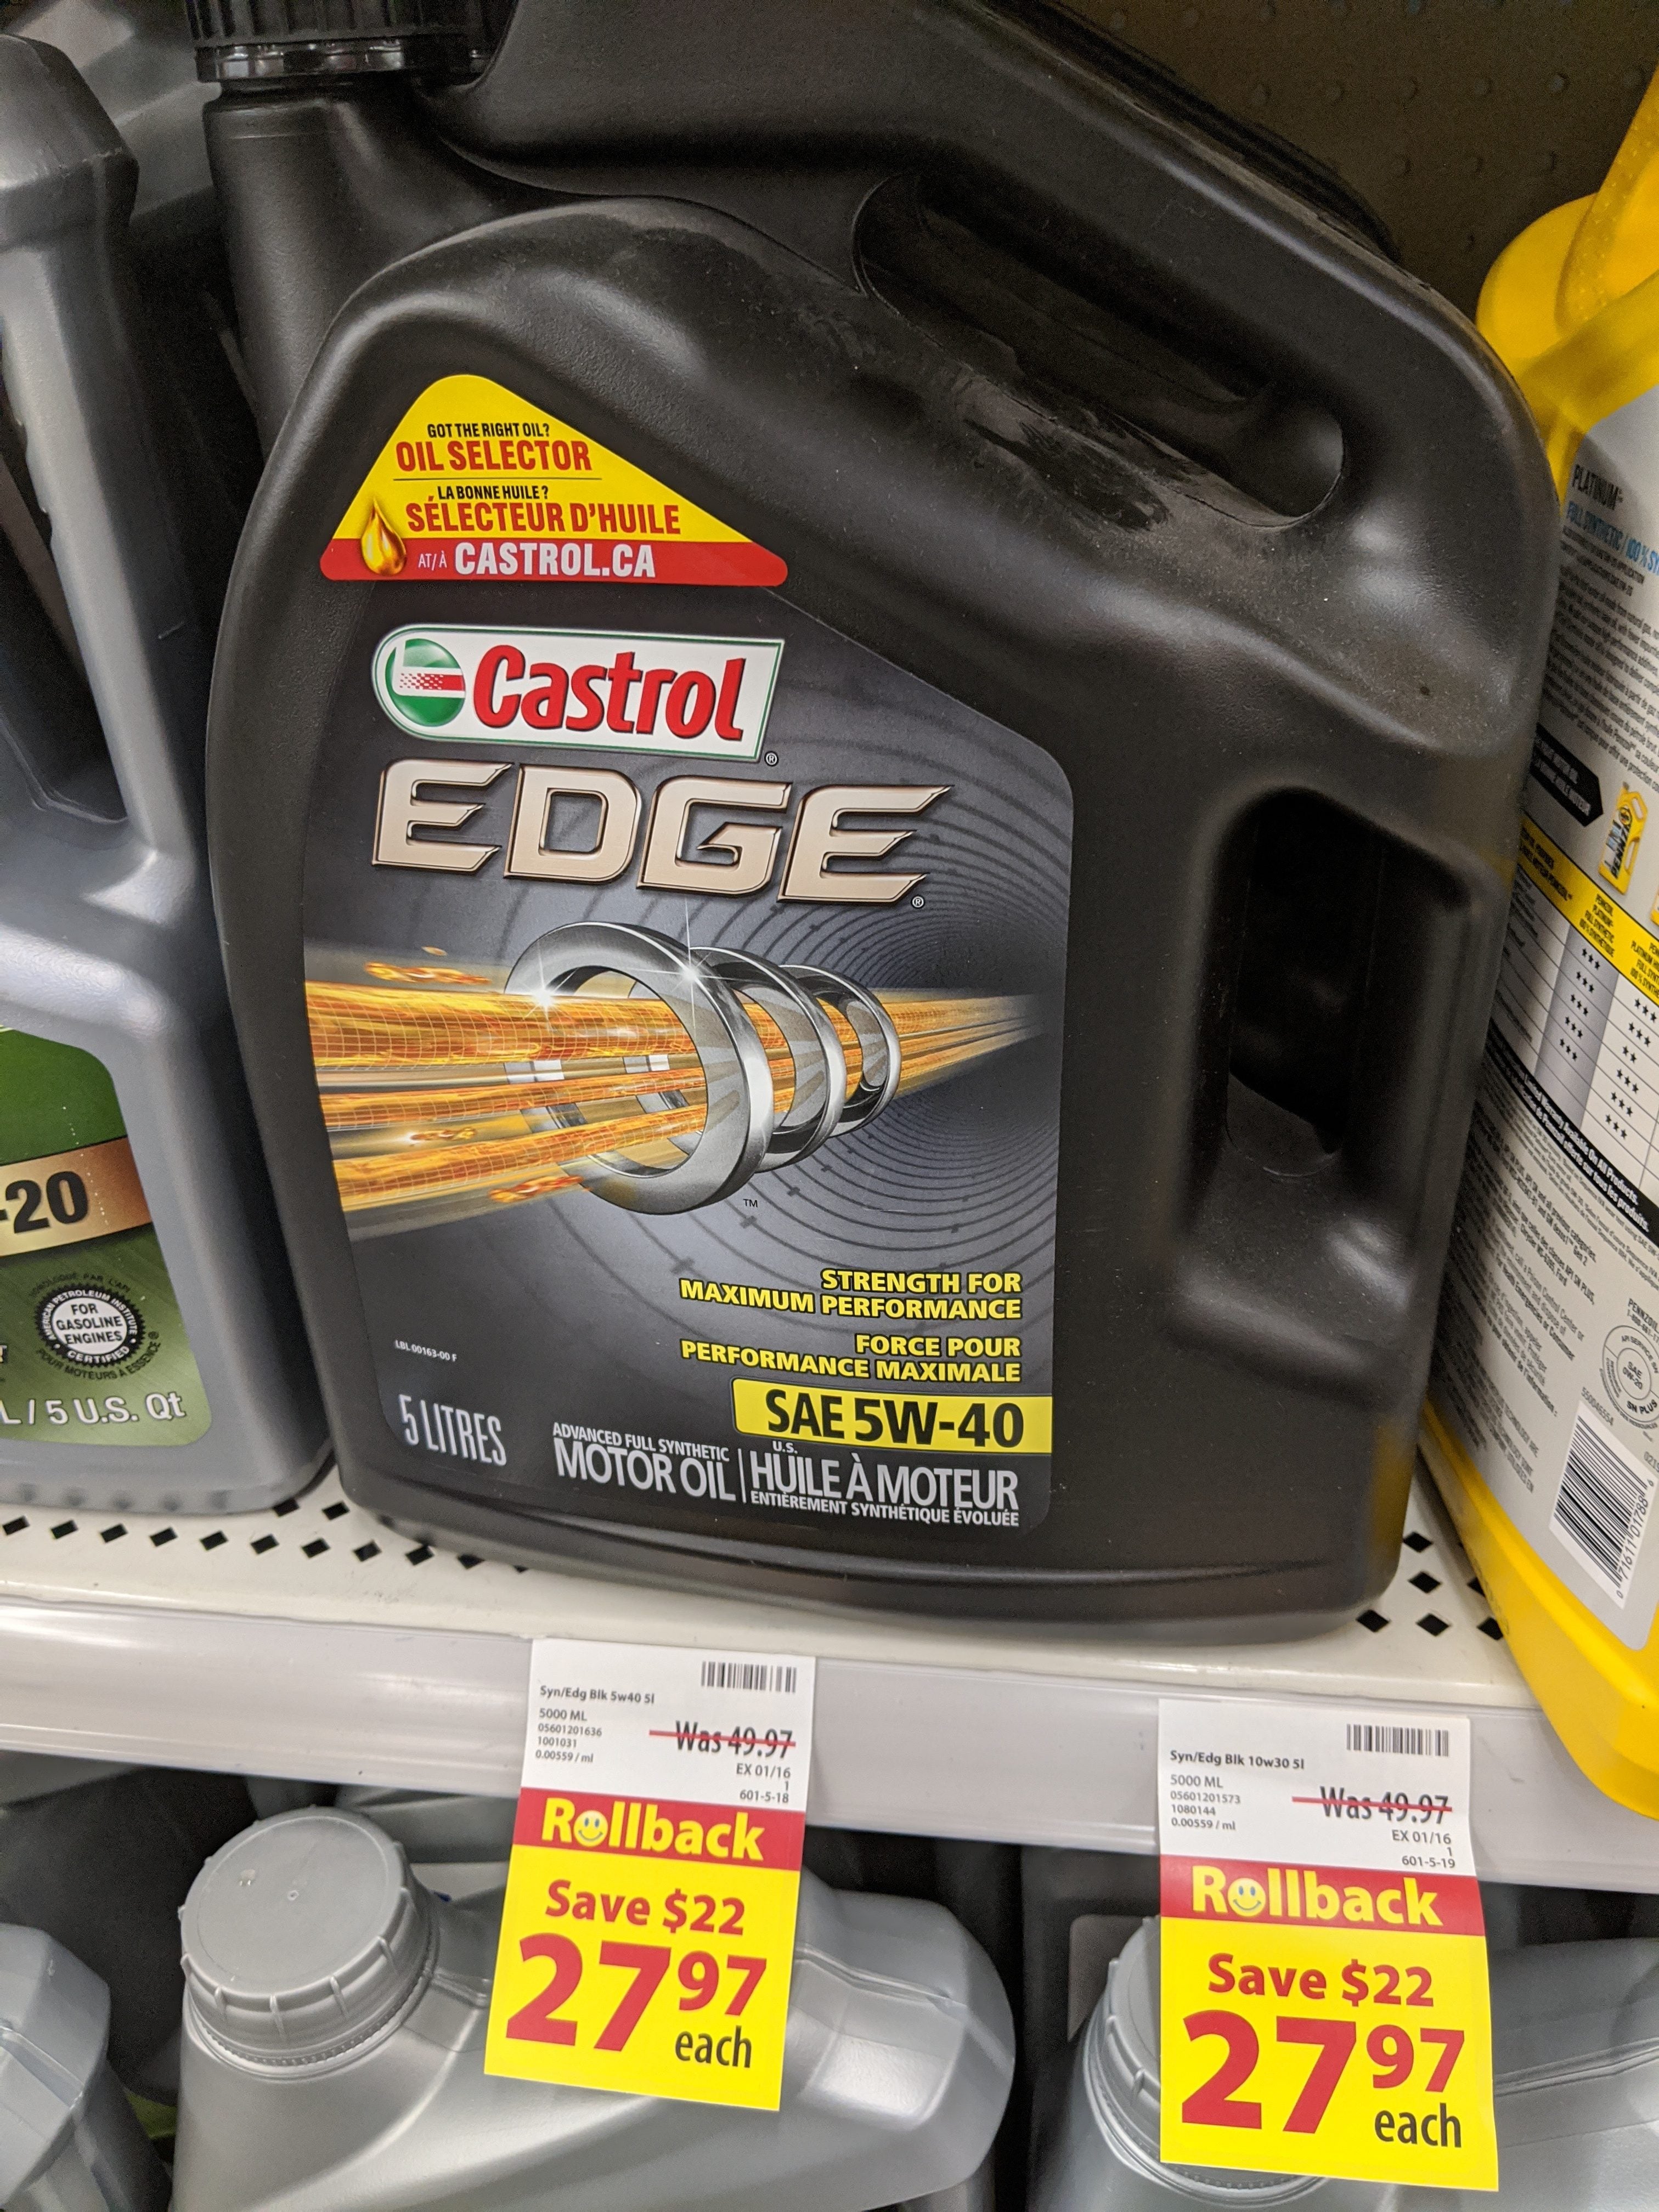 Costco] Castrol edge full synthetic oil 5L for $27.49 - 5w30, 5w40, 5w20 -  Page 2 - RedFlagDeals.com Forums